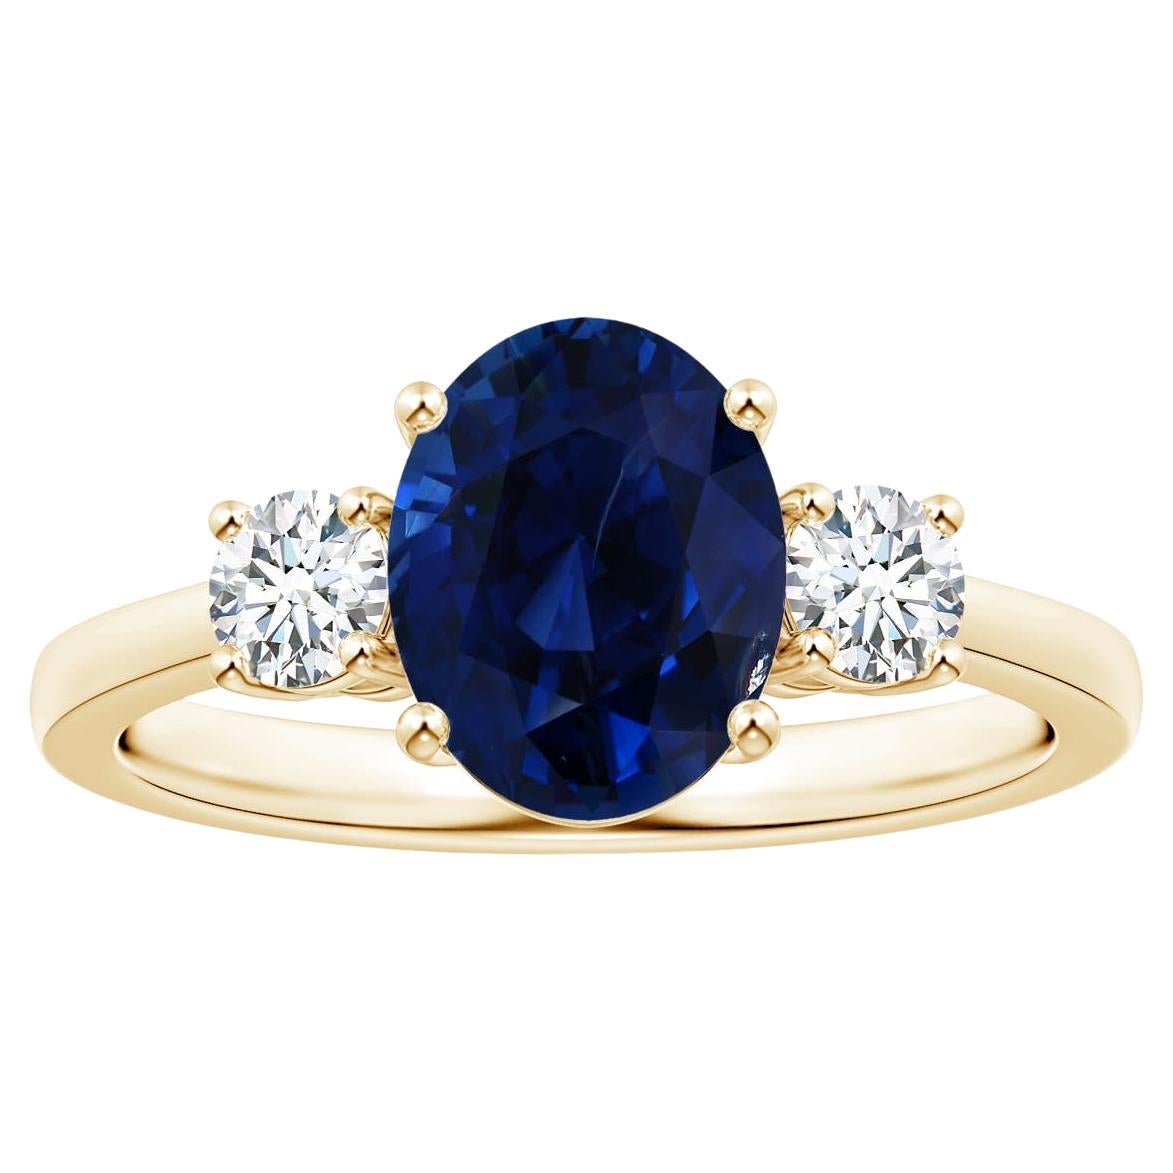 ANGARA GIA Certified Natural Sapphire 3-Stone Ring in Yellow Gold with Diamonds